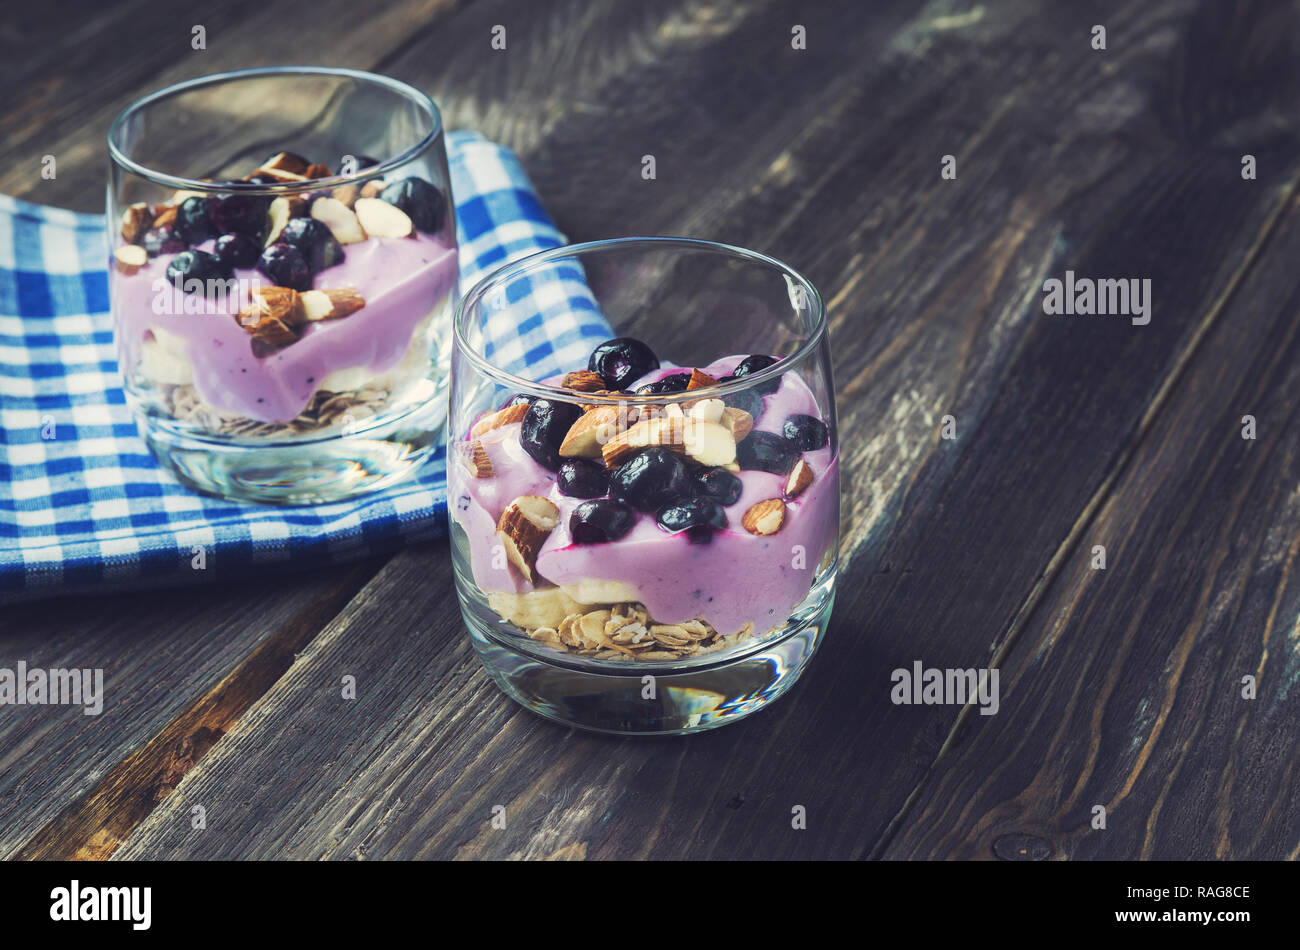 Dessert of oatmeal, banana, yogurt, blueberries and almond in glass bowls on rustic wooden background Stock Photo